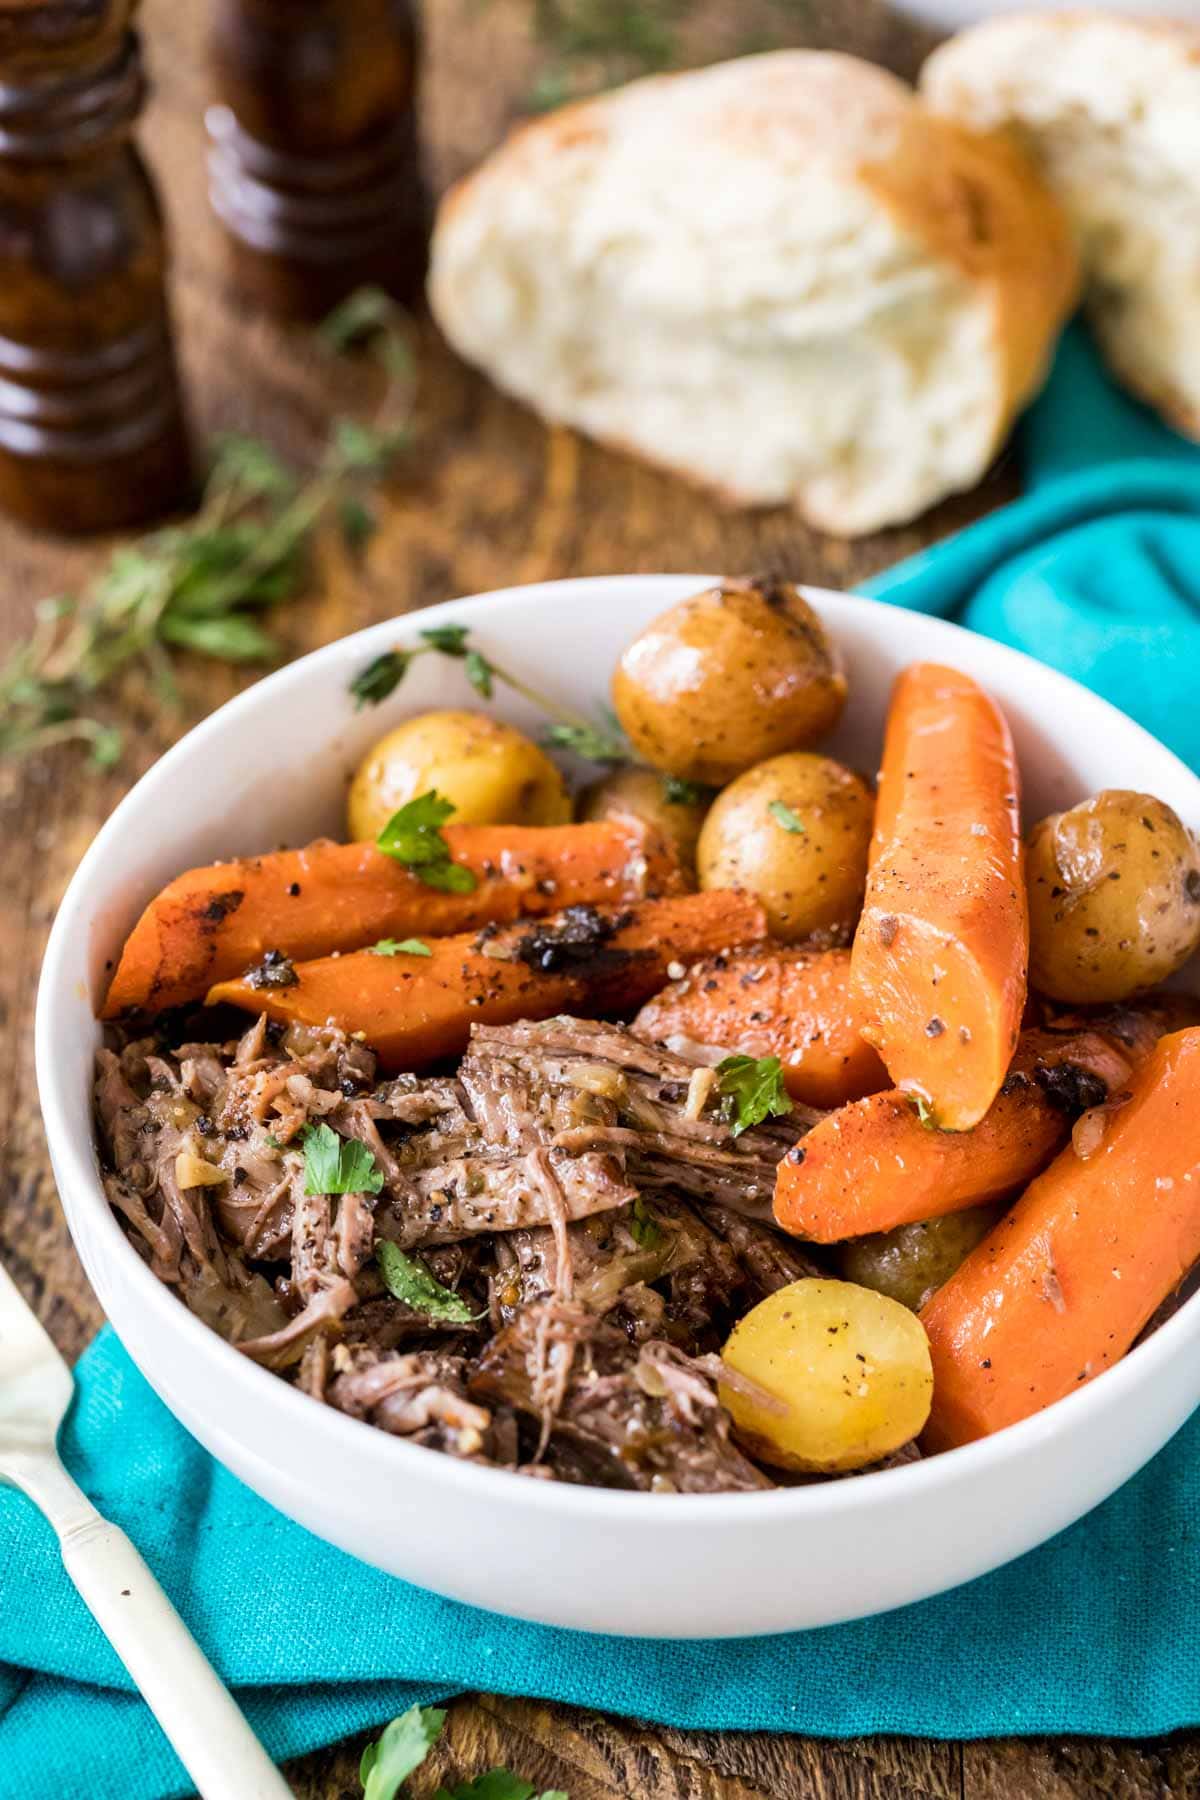 Bowl of shredded beef, carrots, and baby potatoes.